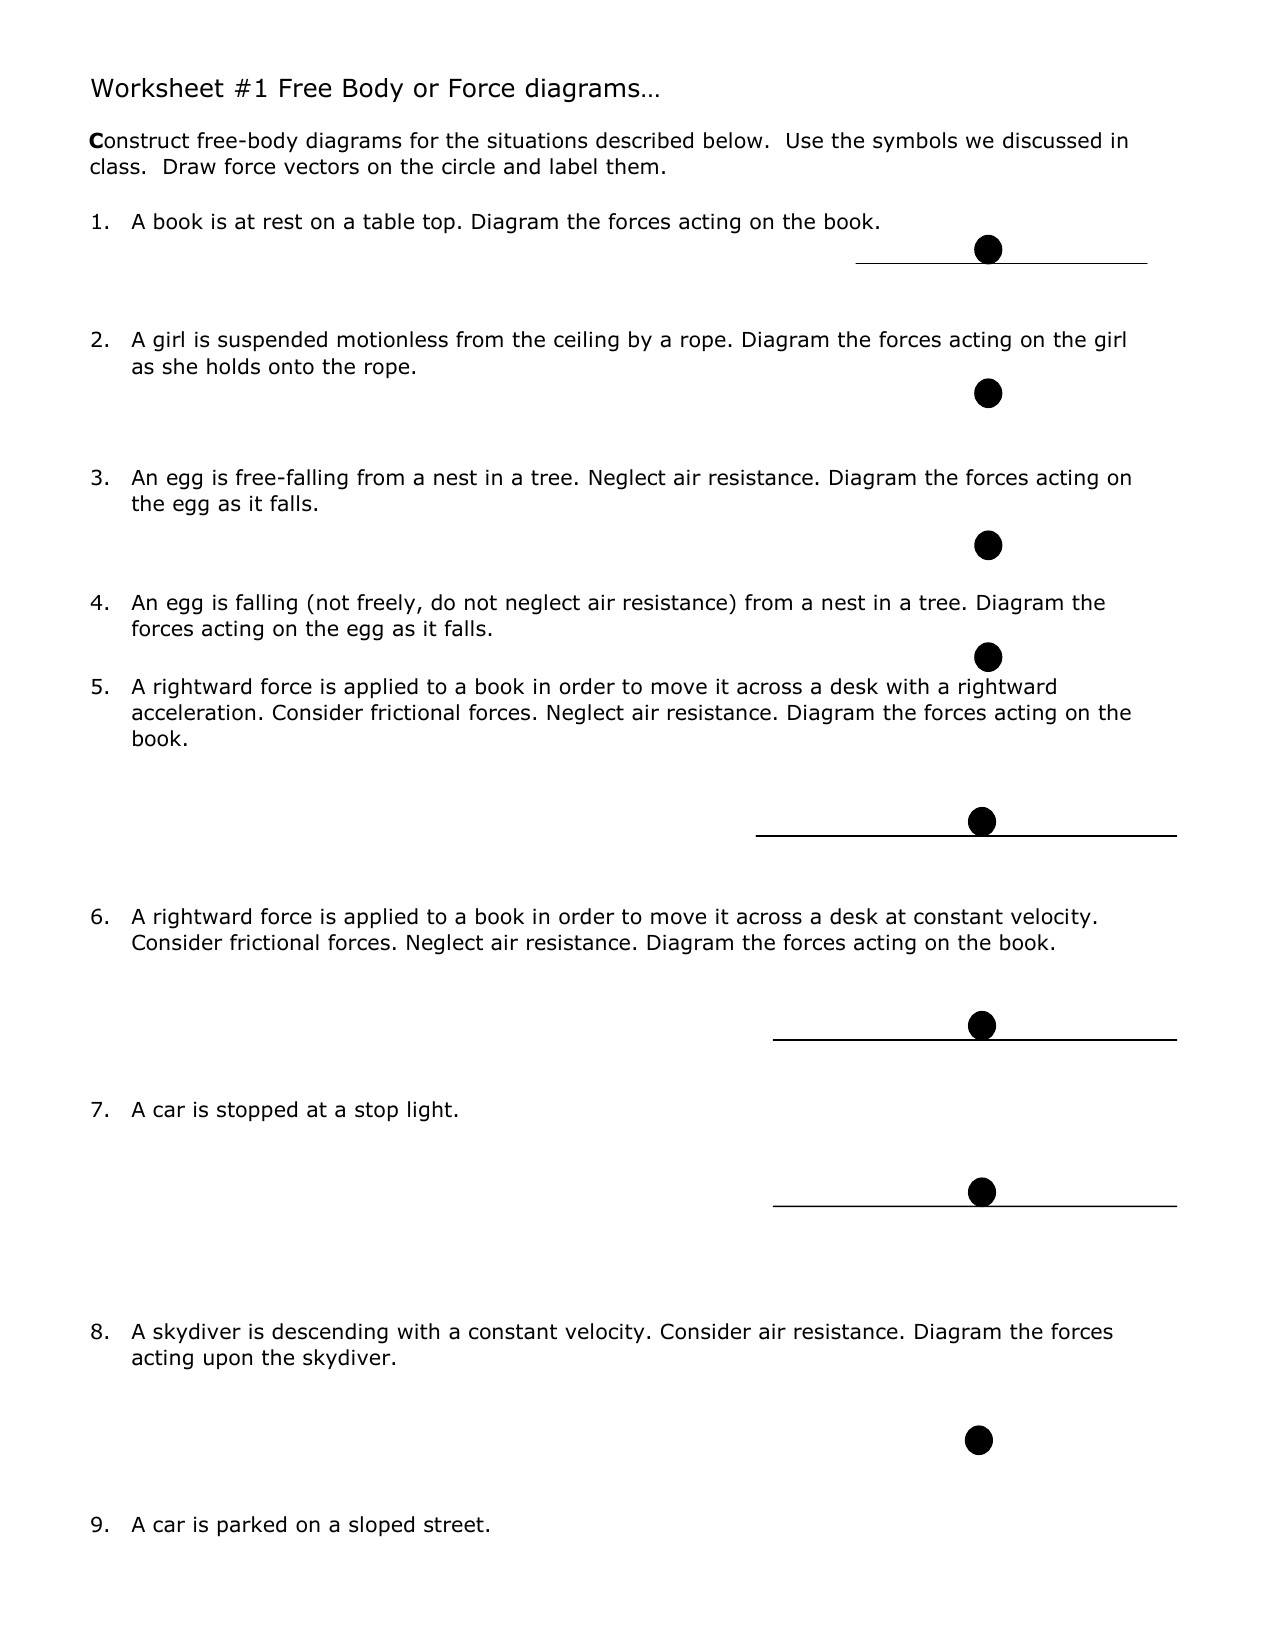 Worksheet 24, Drawing Force Diagrams For Free Body Diagram Worksheet Answers